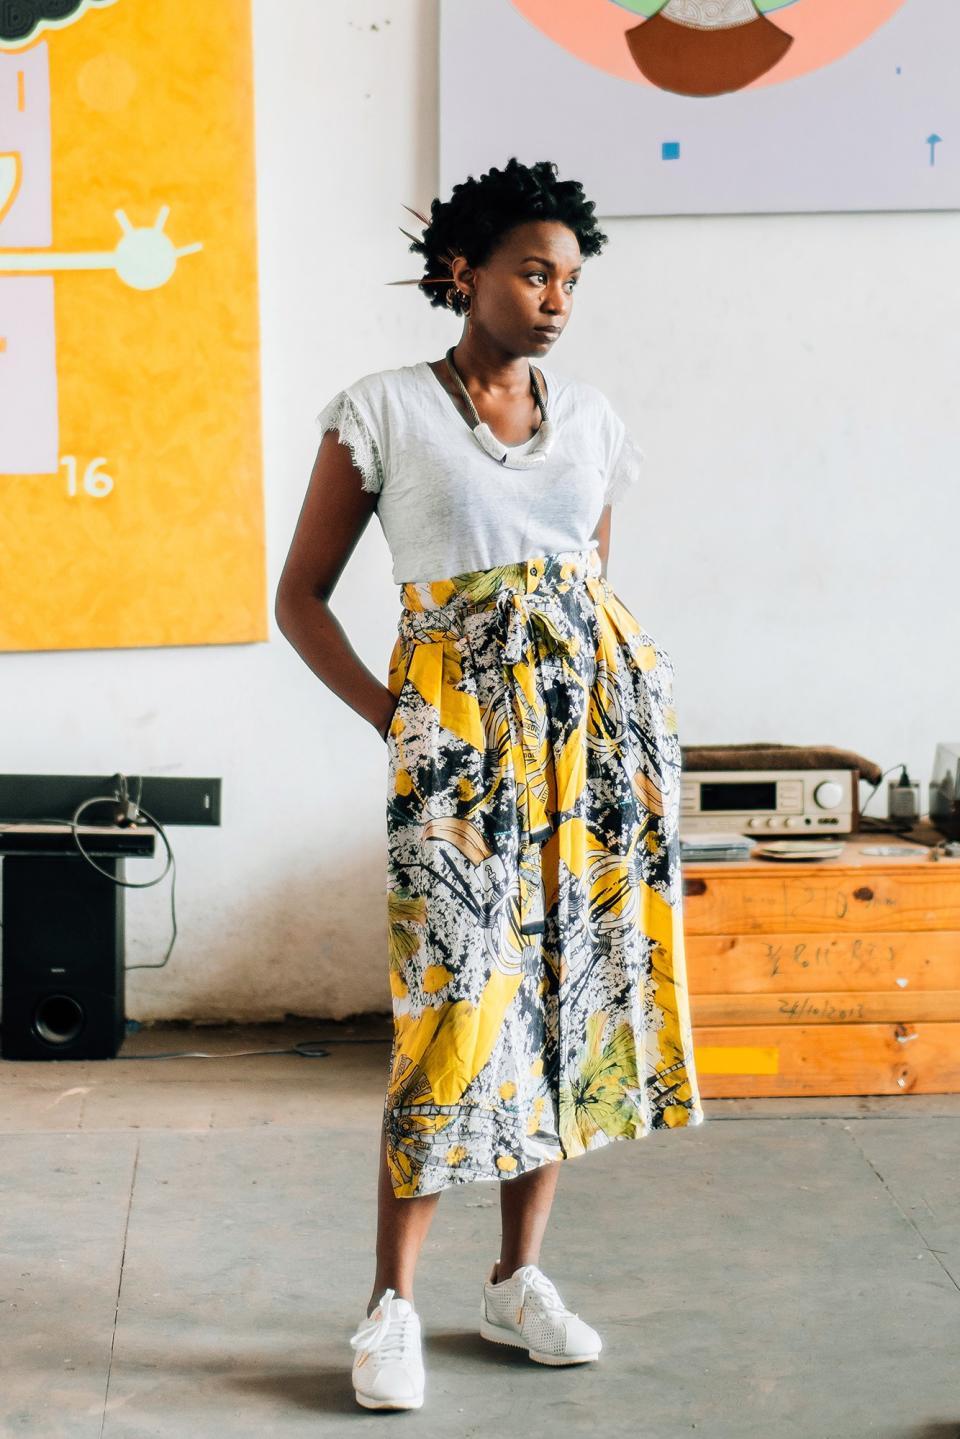 Where to eat, shop, and explore, according to 16 of Nairobi’s most stylish women who are using arts, fashion, and education to further build community.